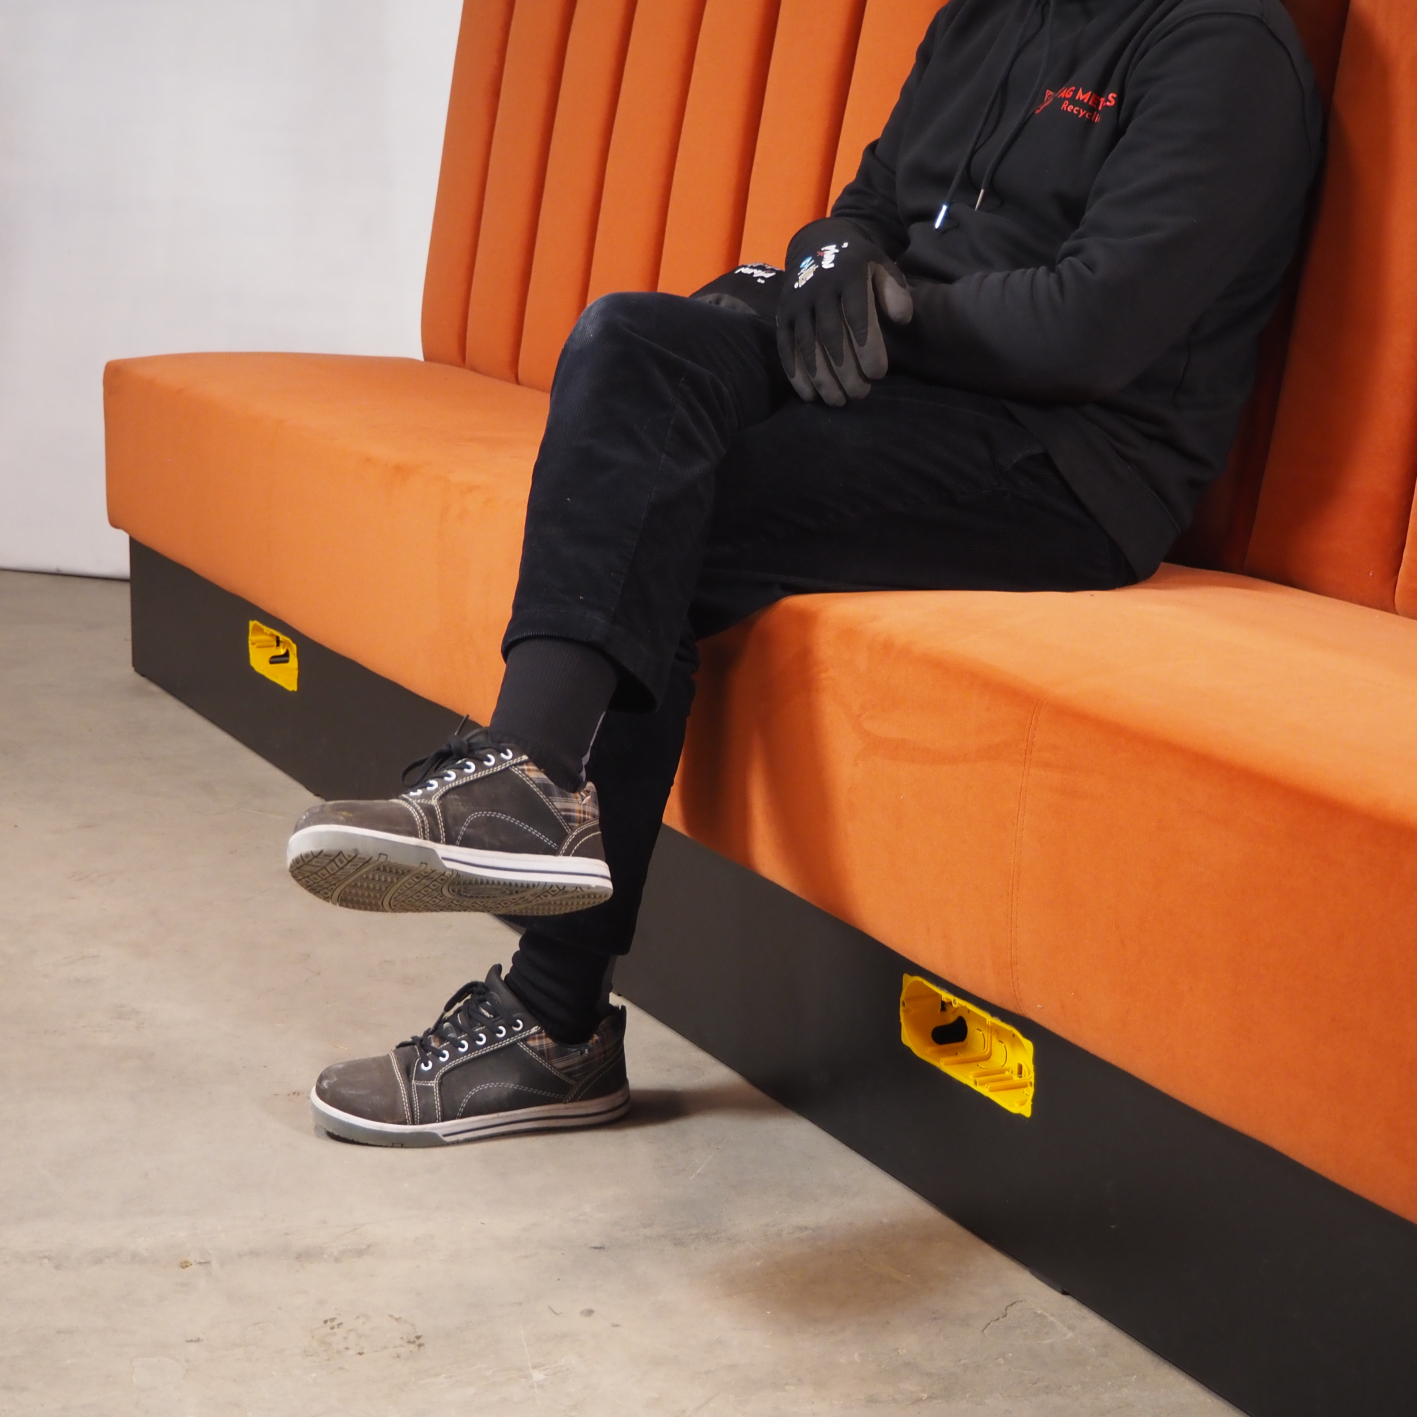 Modular bench upholstered with fabric